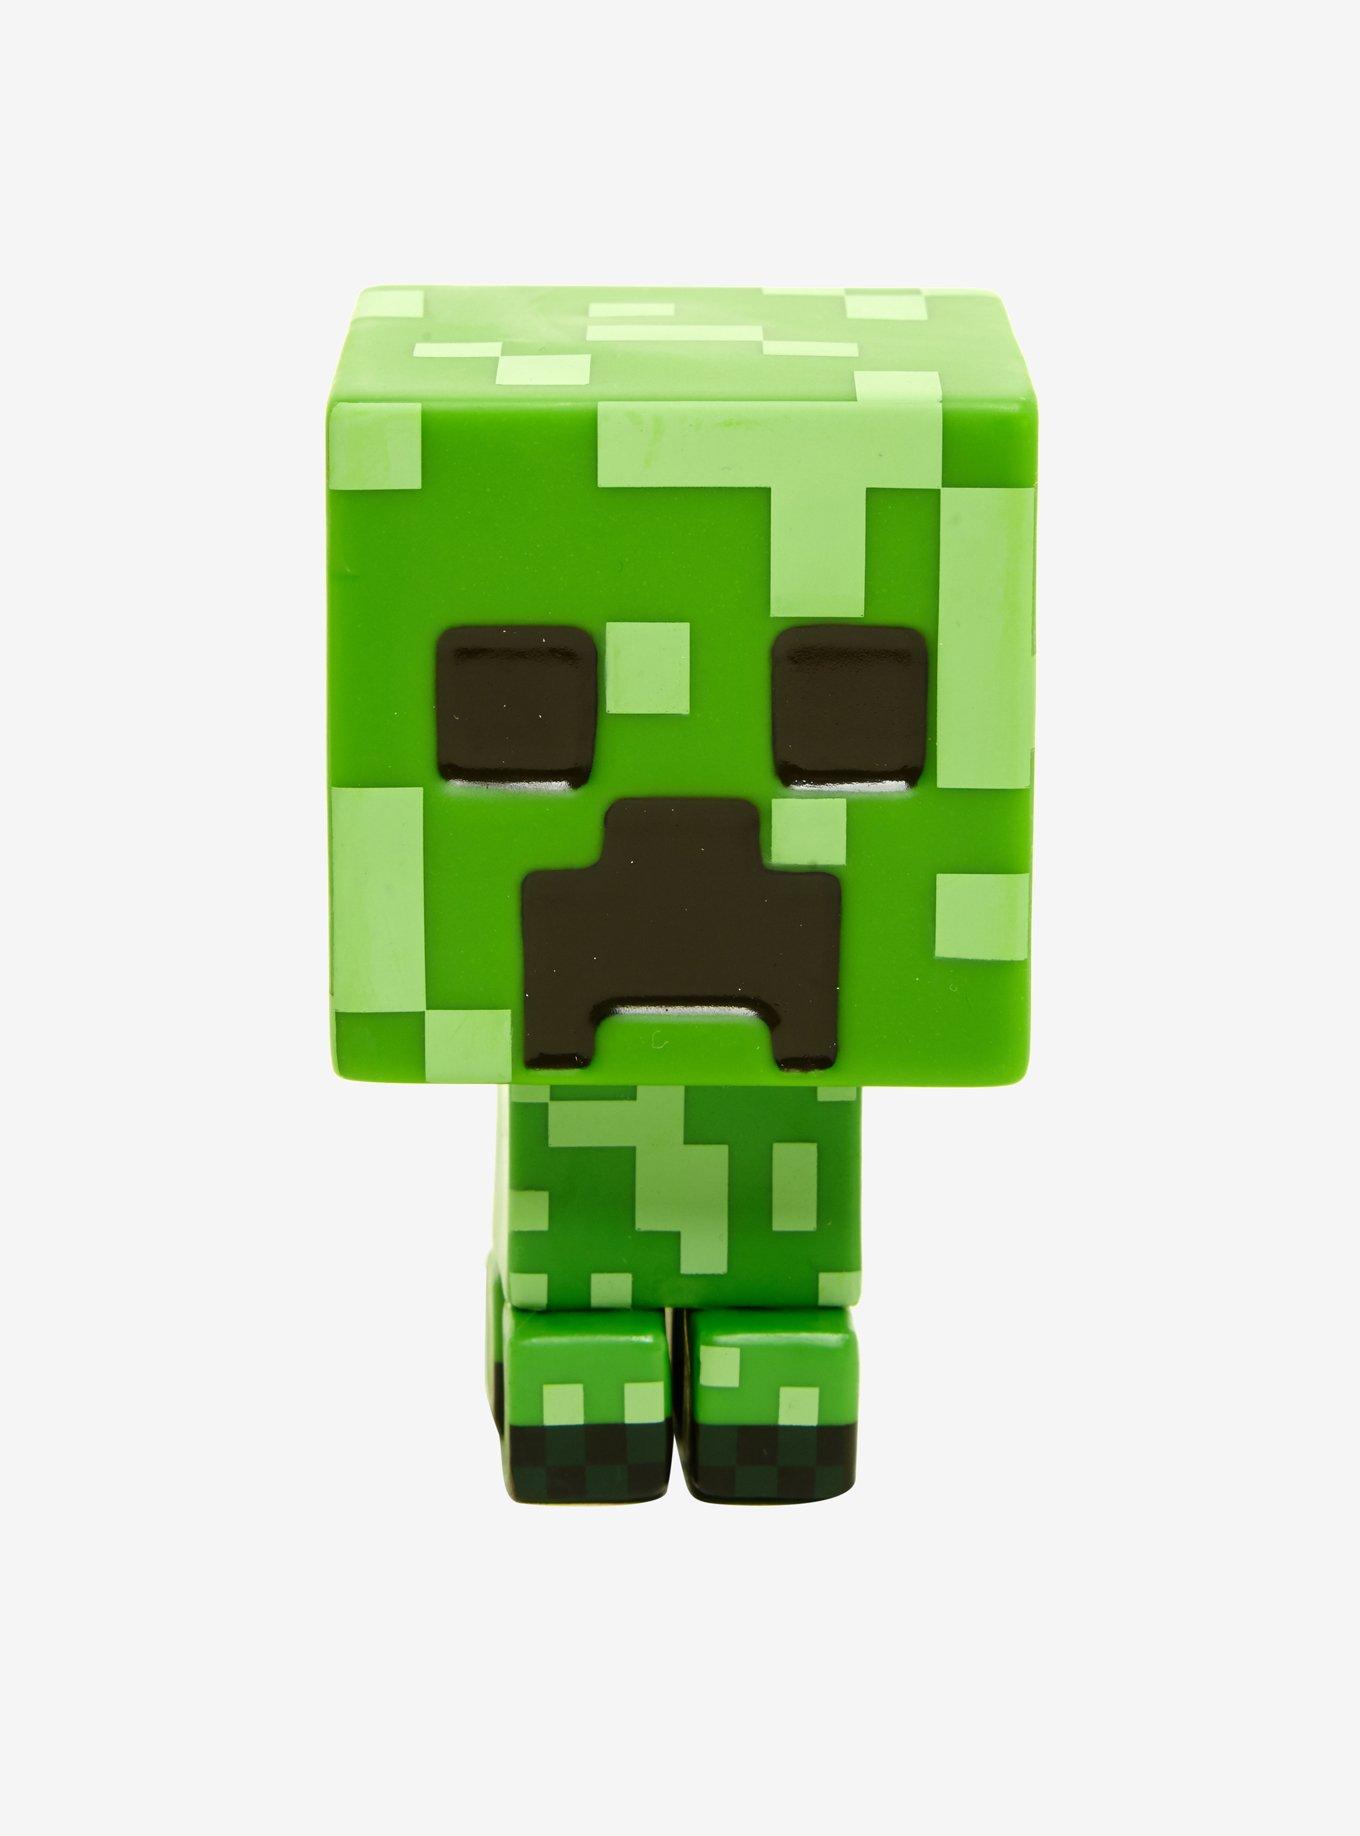 Pop & tee minecraft charged creeper funko + t-shirt size s – Z POP Toys